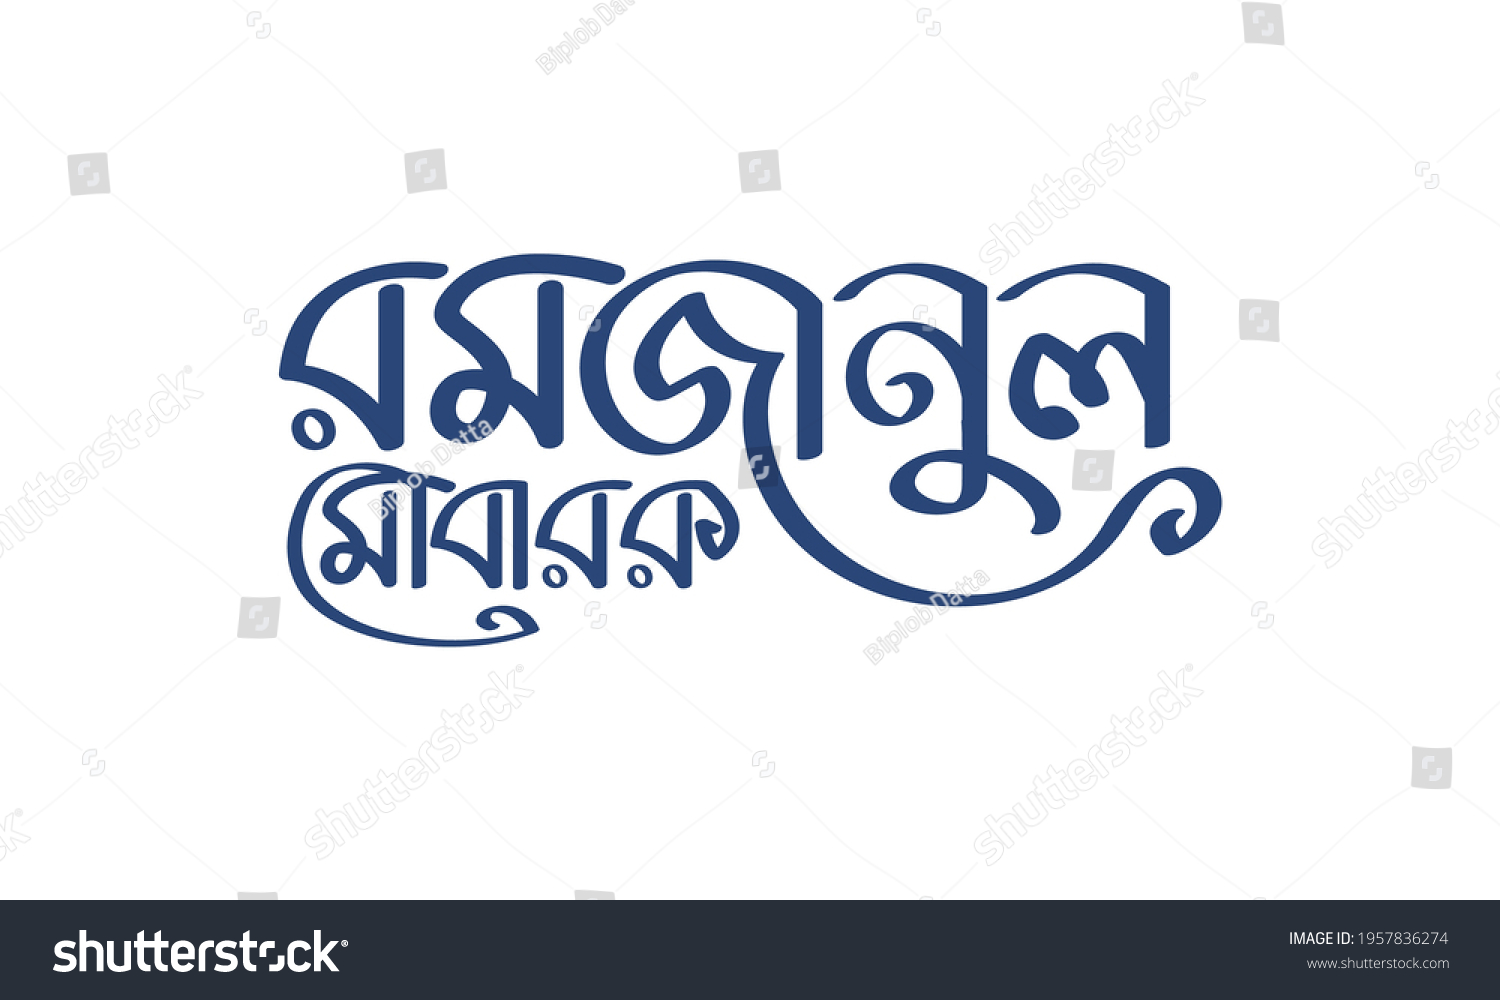 SVG of Ramjanul Mubarak bangla typography, calligraphy, logo, handmade font, custom bangla letter and bengali lettring on white background with bule color text. svg